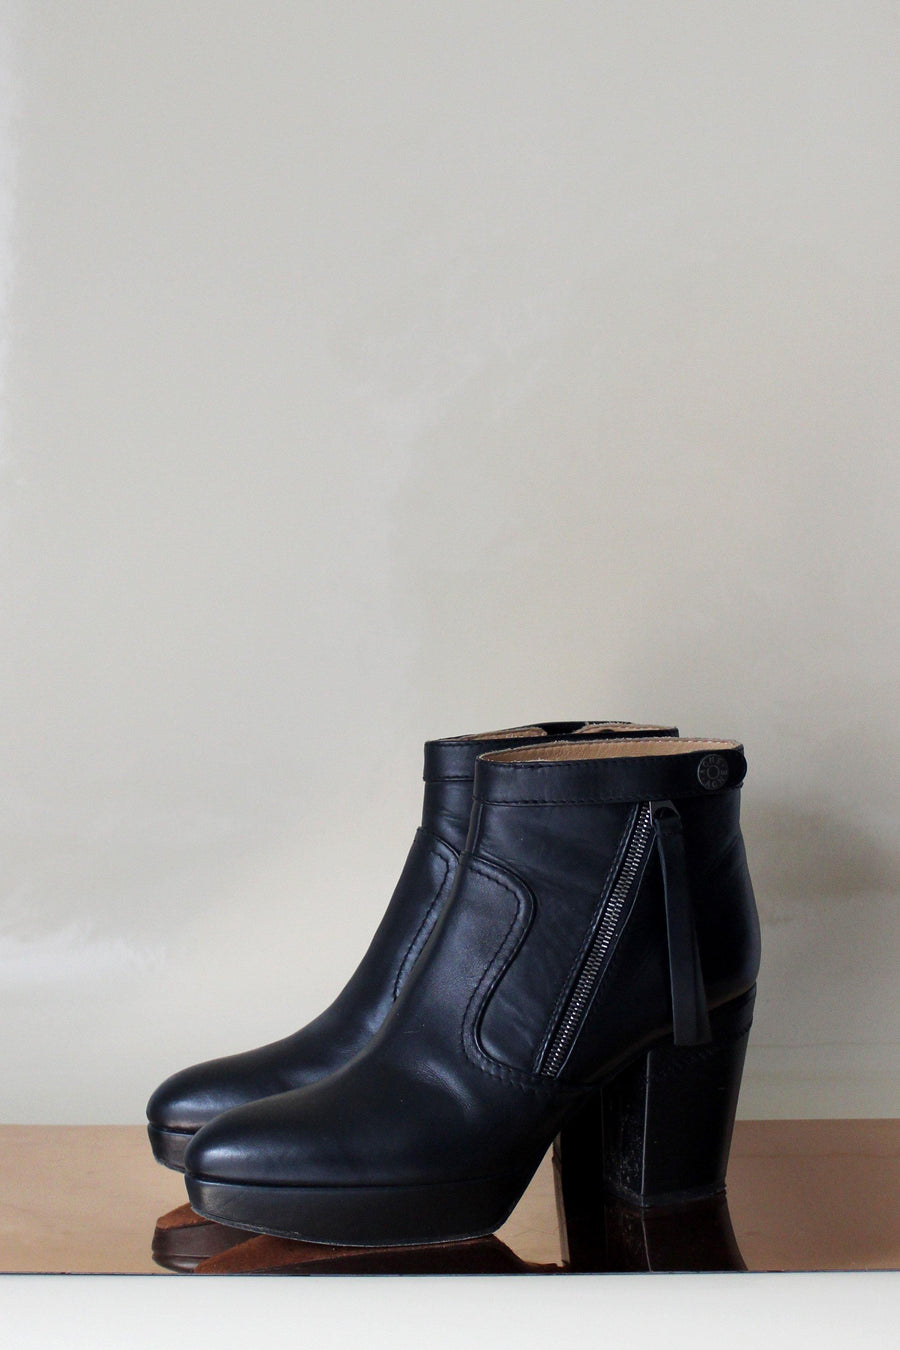 ACNE STUDIOS Track Boots - The Good Store Berlin